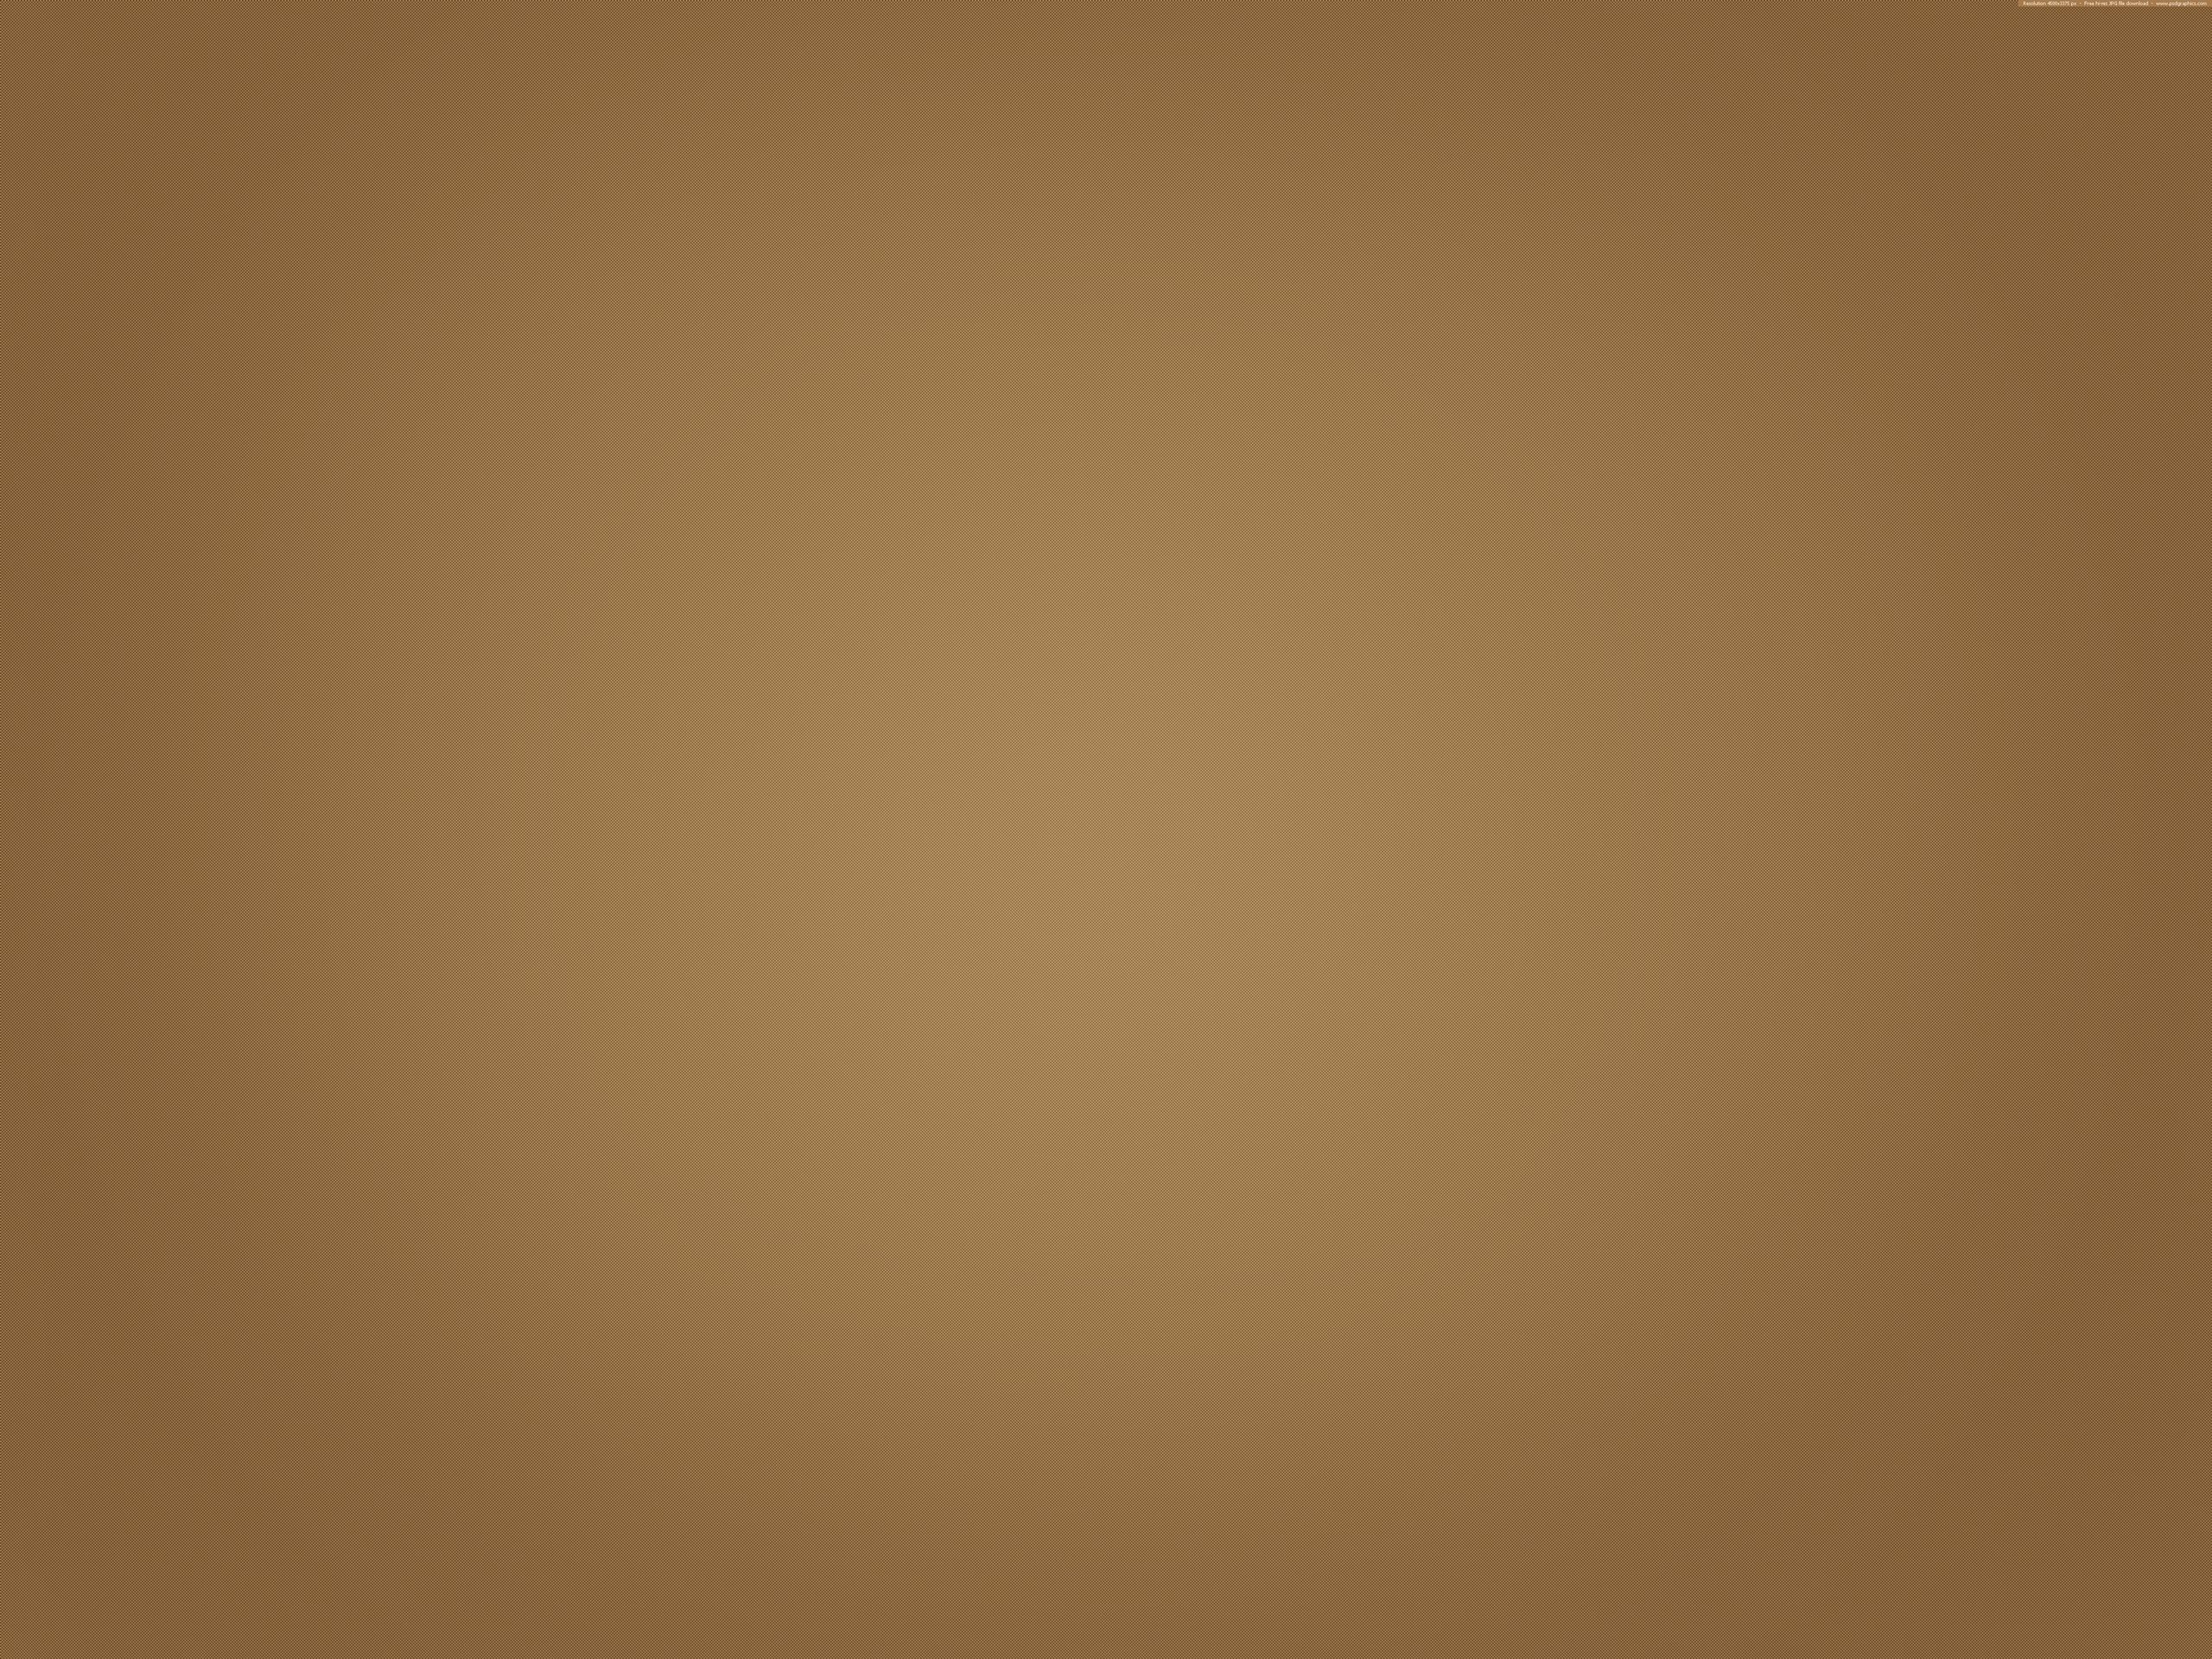 paper texture wallpaper,brown,yellow,beige,material property